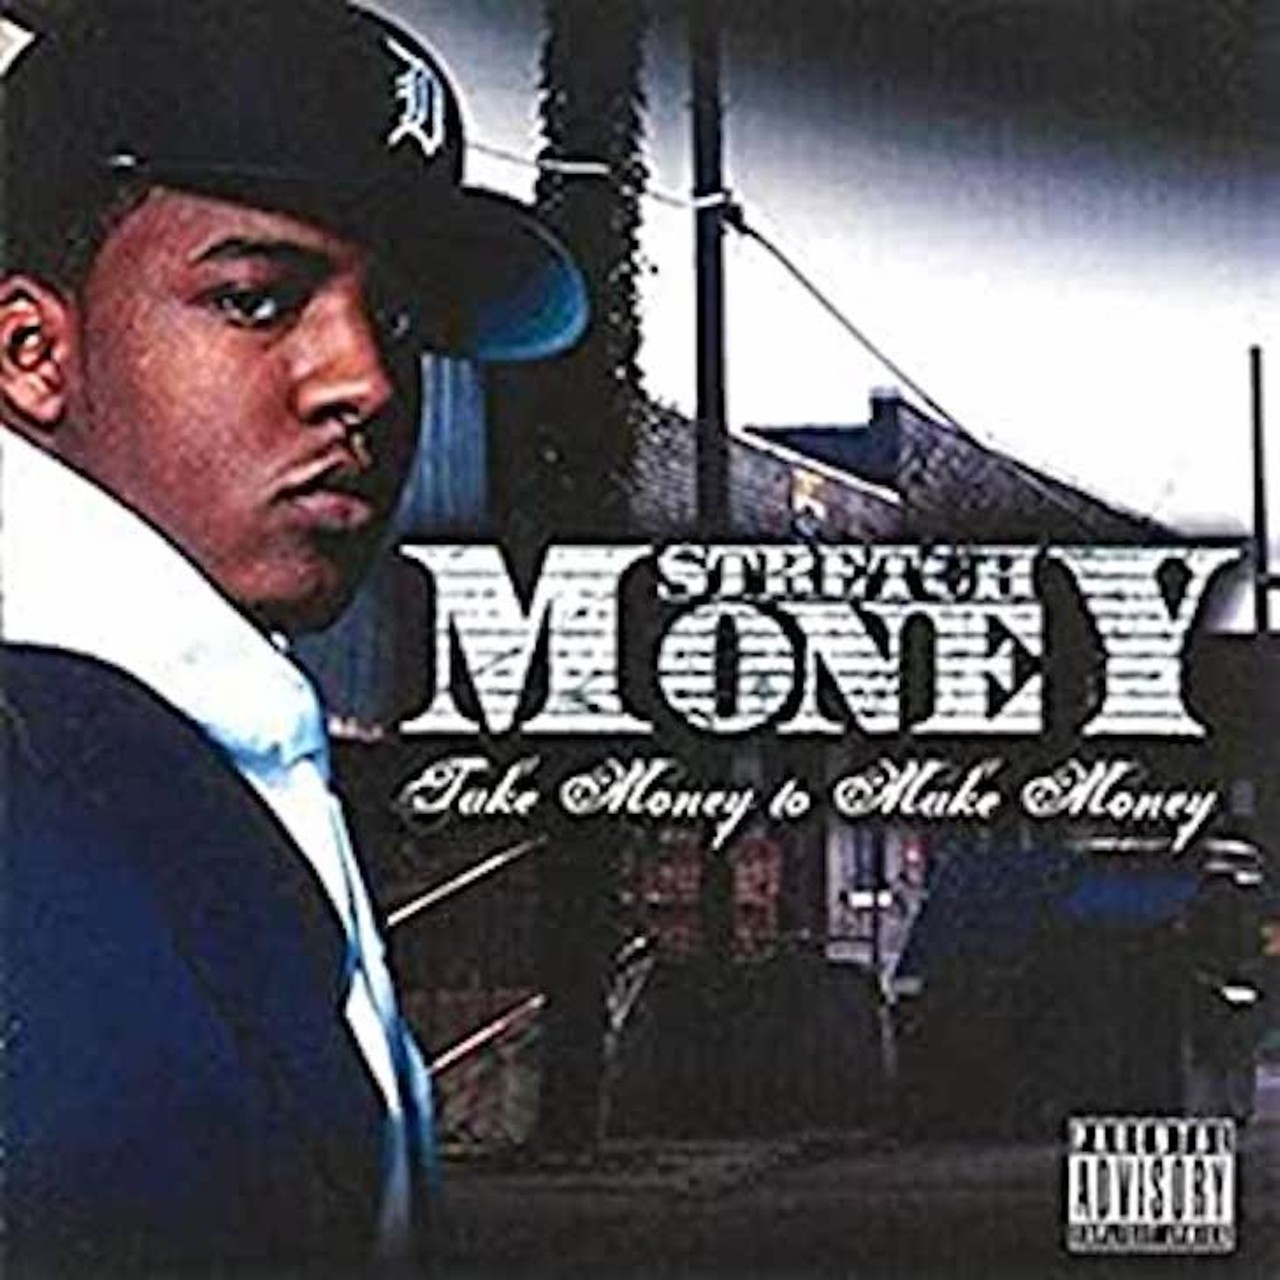 &#147;Stretch Money finna blow, picture that. I remember back in high school when he was tryin&#146; to rap. Last time I seen him, he was walkin&#146; down Mack, now I heard homeboy doing this and that &#133;&#148; - Stretch Money, 
from Take Money to Make Money
Photo via Spotify